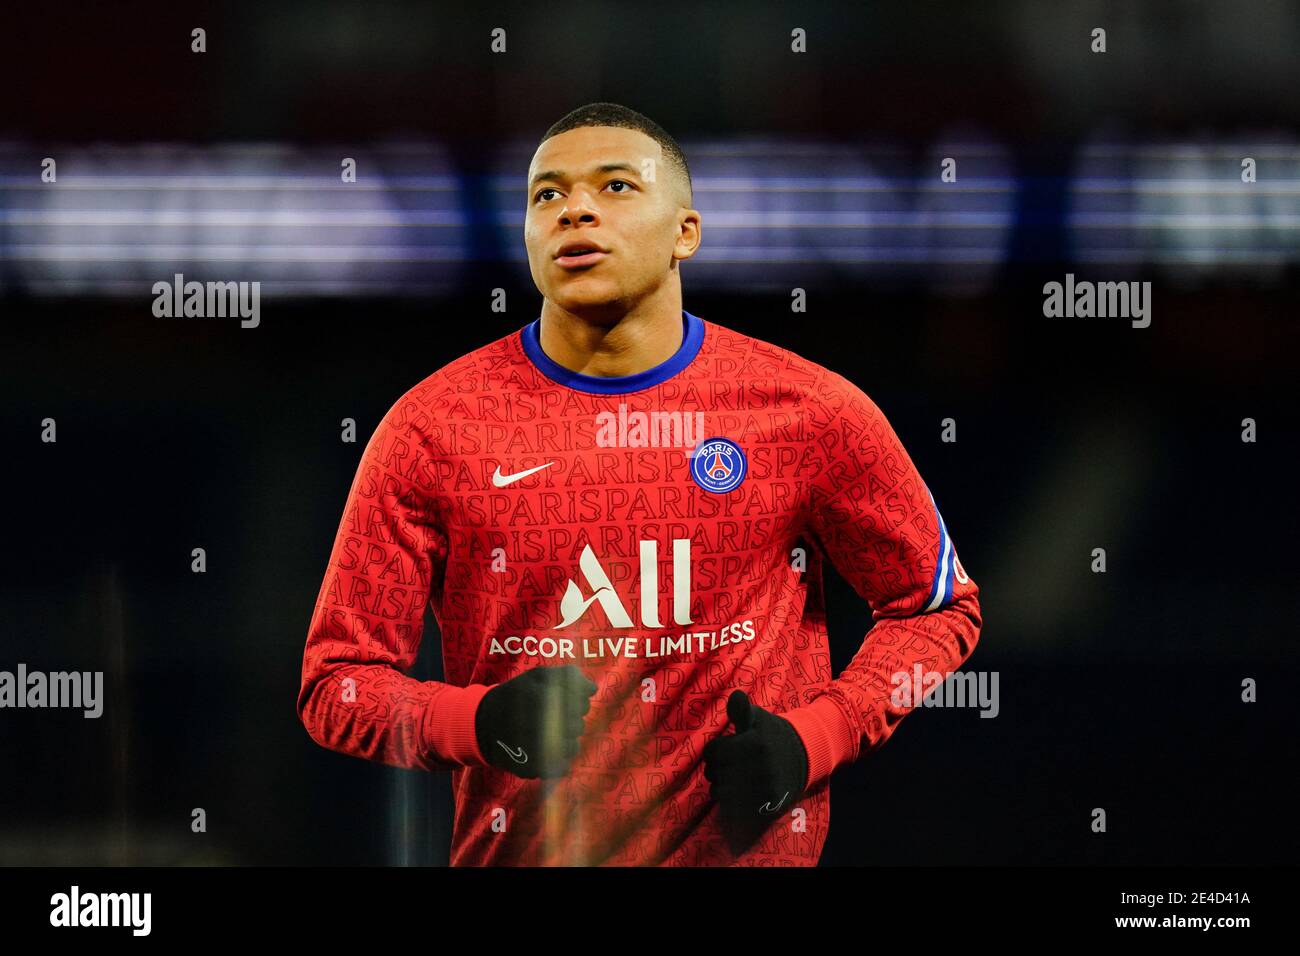 Kylian Mbappe (PSG) during the warm up of the French Ligue 1 Paris Saint  Germain (PSG) vs Montpellier (MHSC) football match at the Parc des Prince,  in Paris, France on January 22,